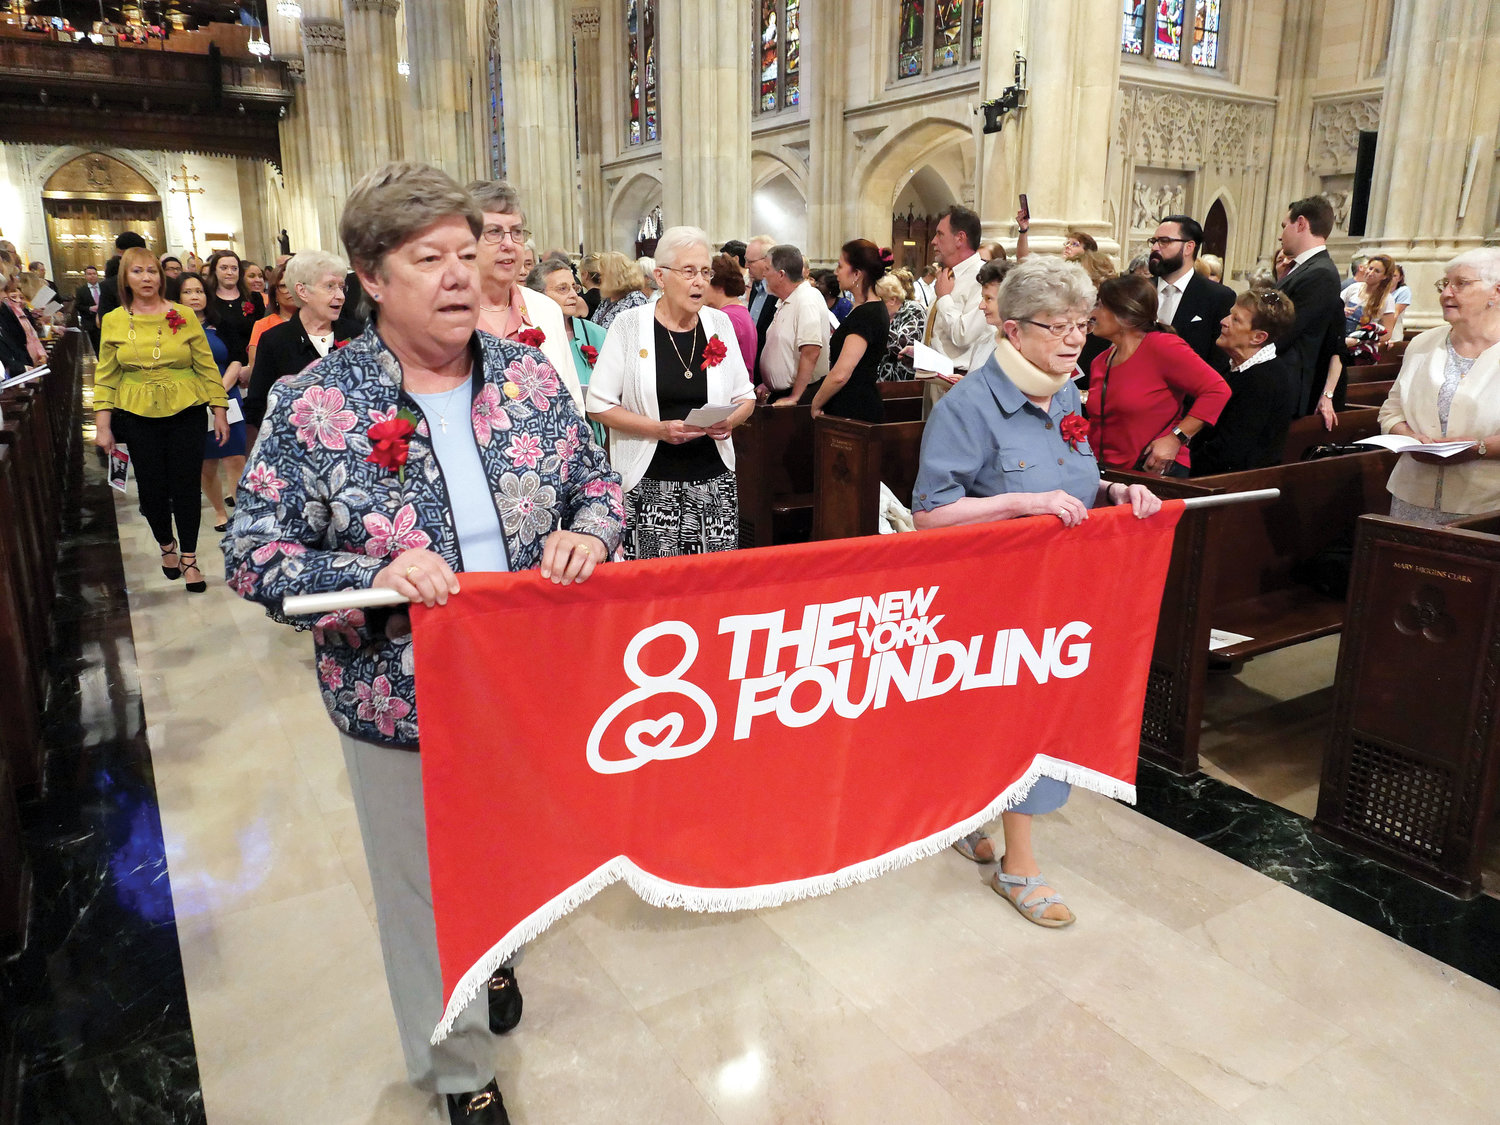 Sisters of Charity Donna Dodge, S.C., left, and Jane Iannucelli, S.C., carry a banner in procession for a Mass Cardinal Dolan celebrated in honor of the New York Foundling’s century and a half of service June 6 at St. Patrick’s Cathedral.